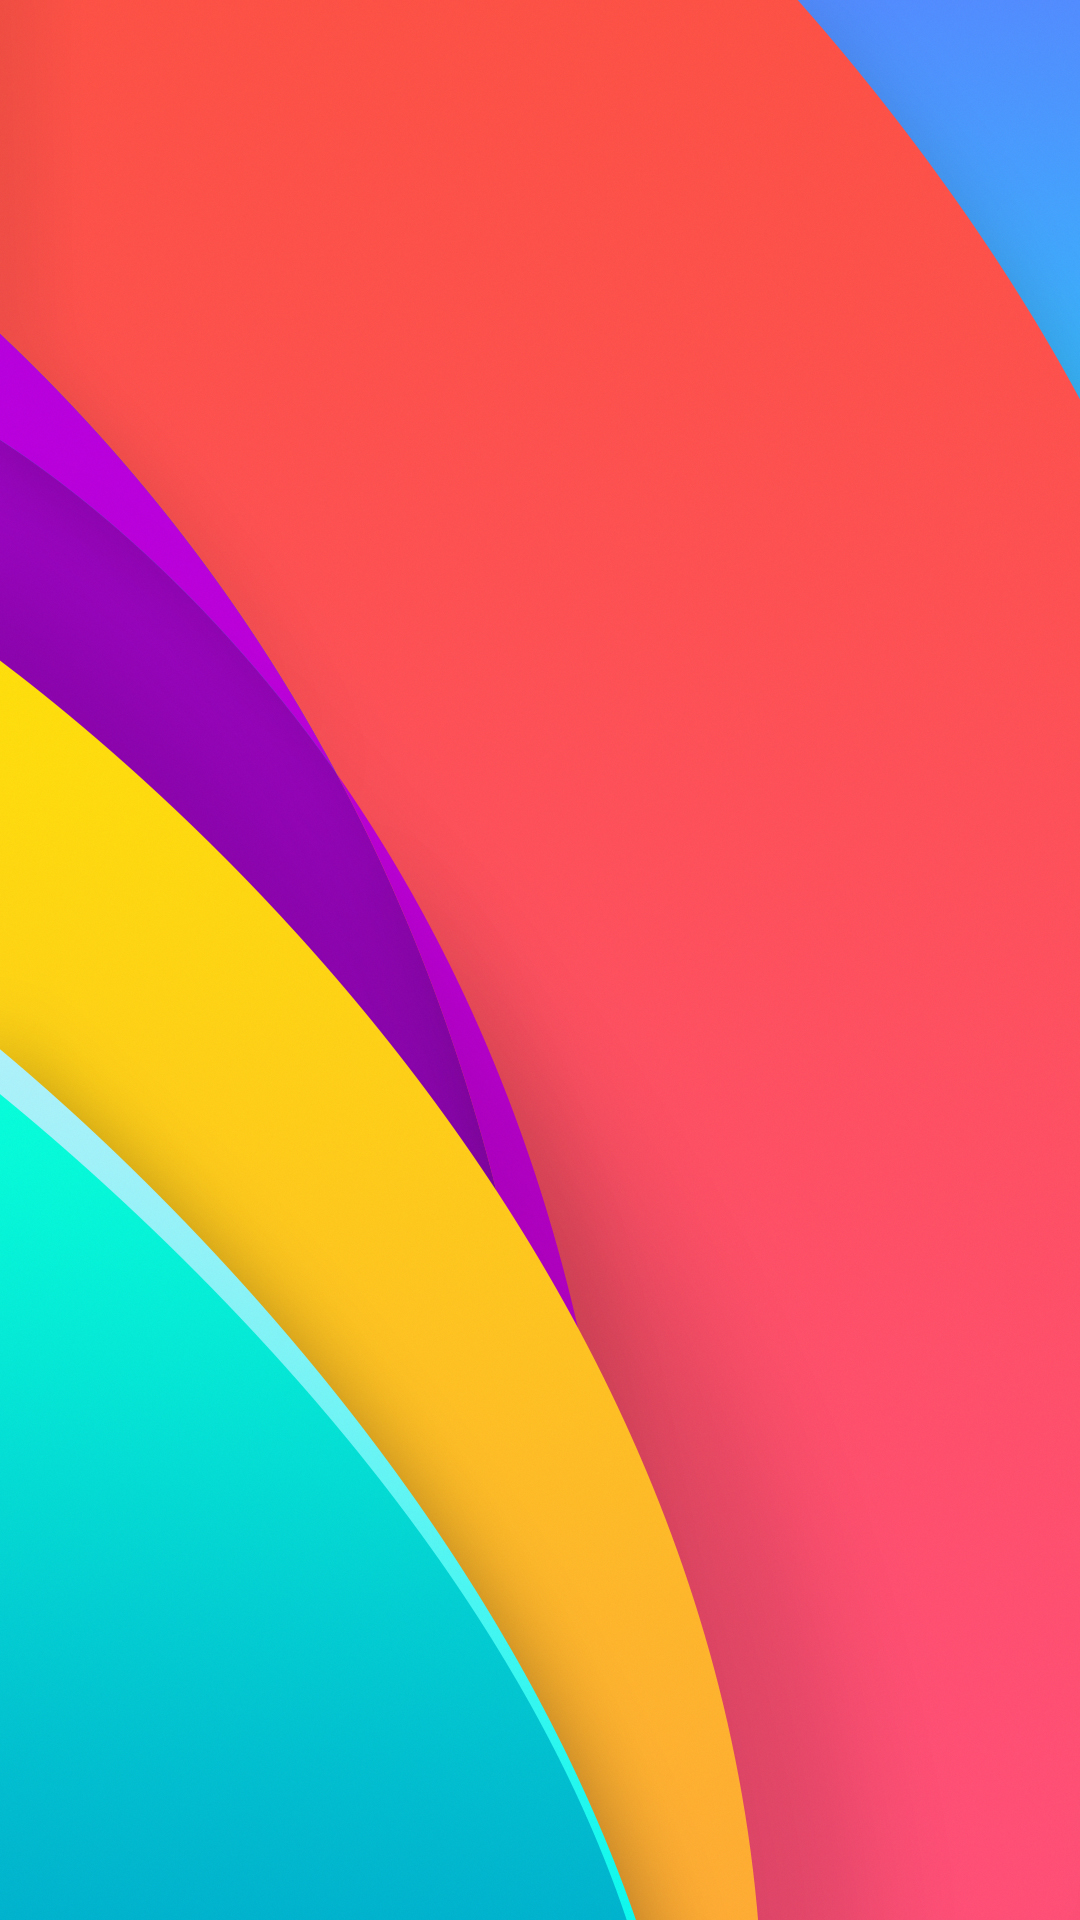 Oppo R5 Stock Wallpaper Android